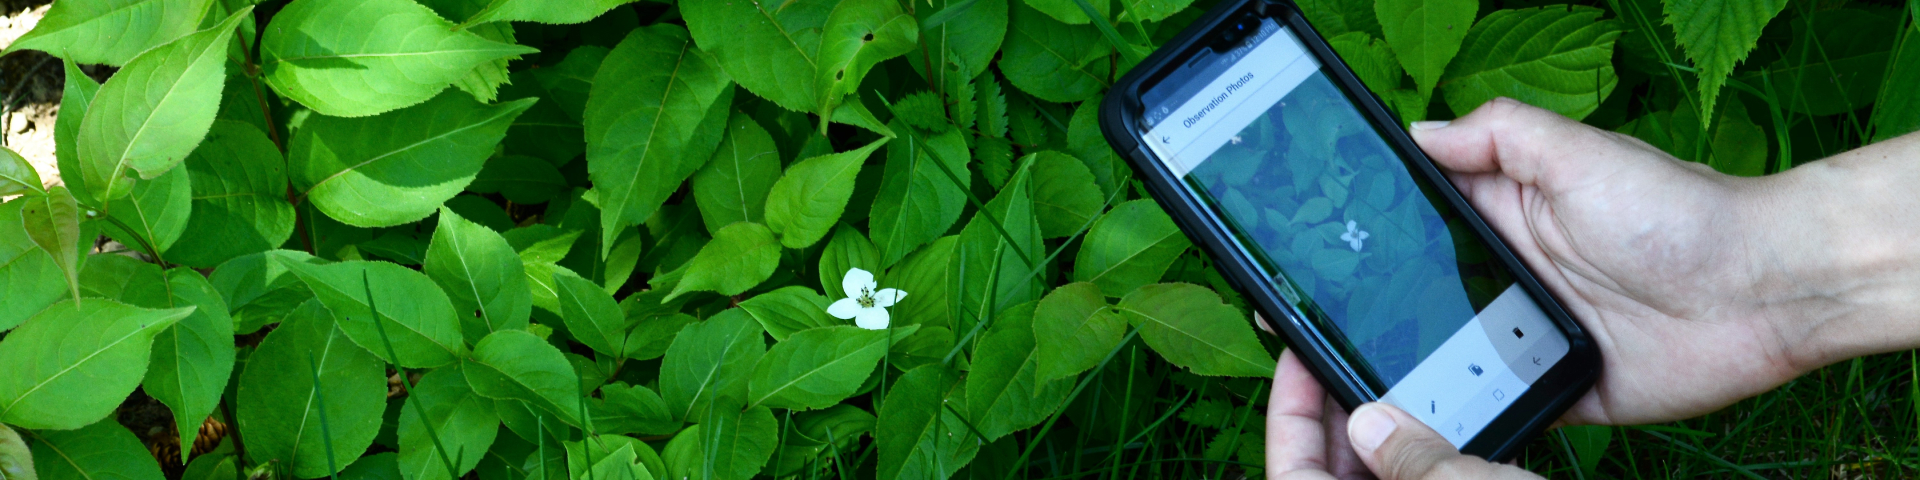 A person takes a photo of a Bunchberry with a mobile device.